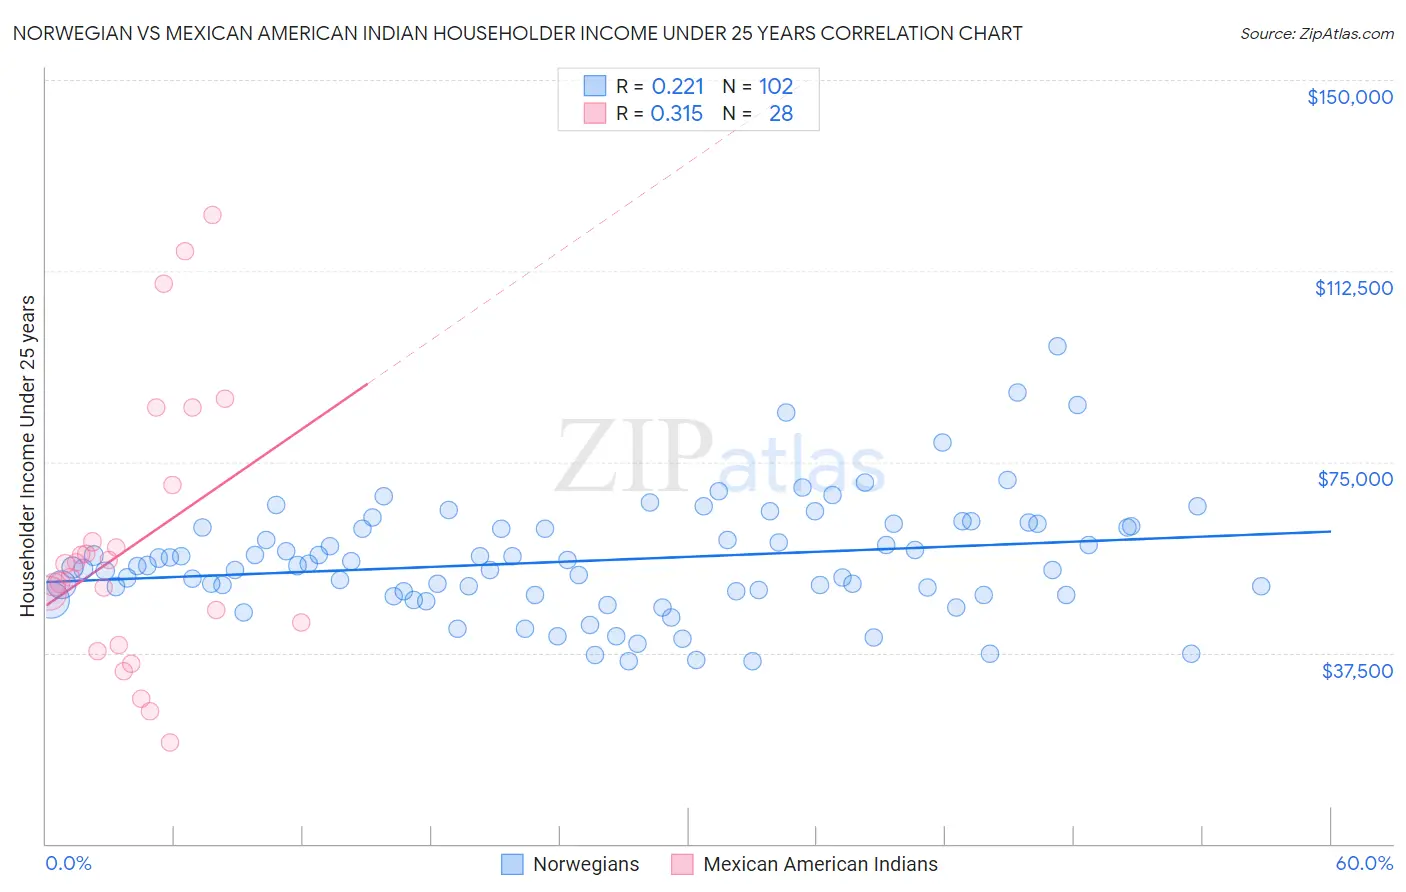 Norwegian vs Mexican American Indian Householder Income Under 25 years